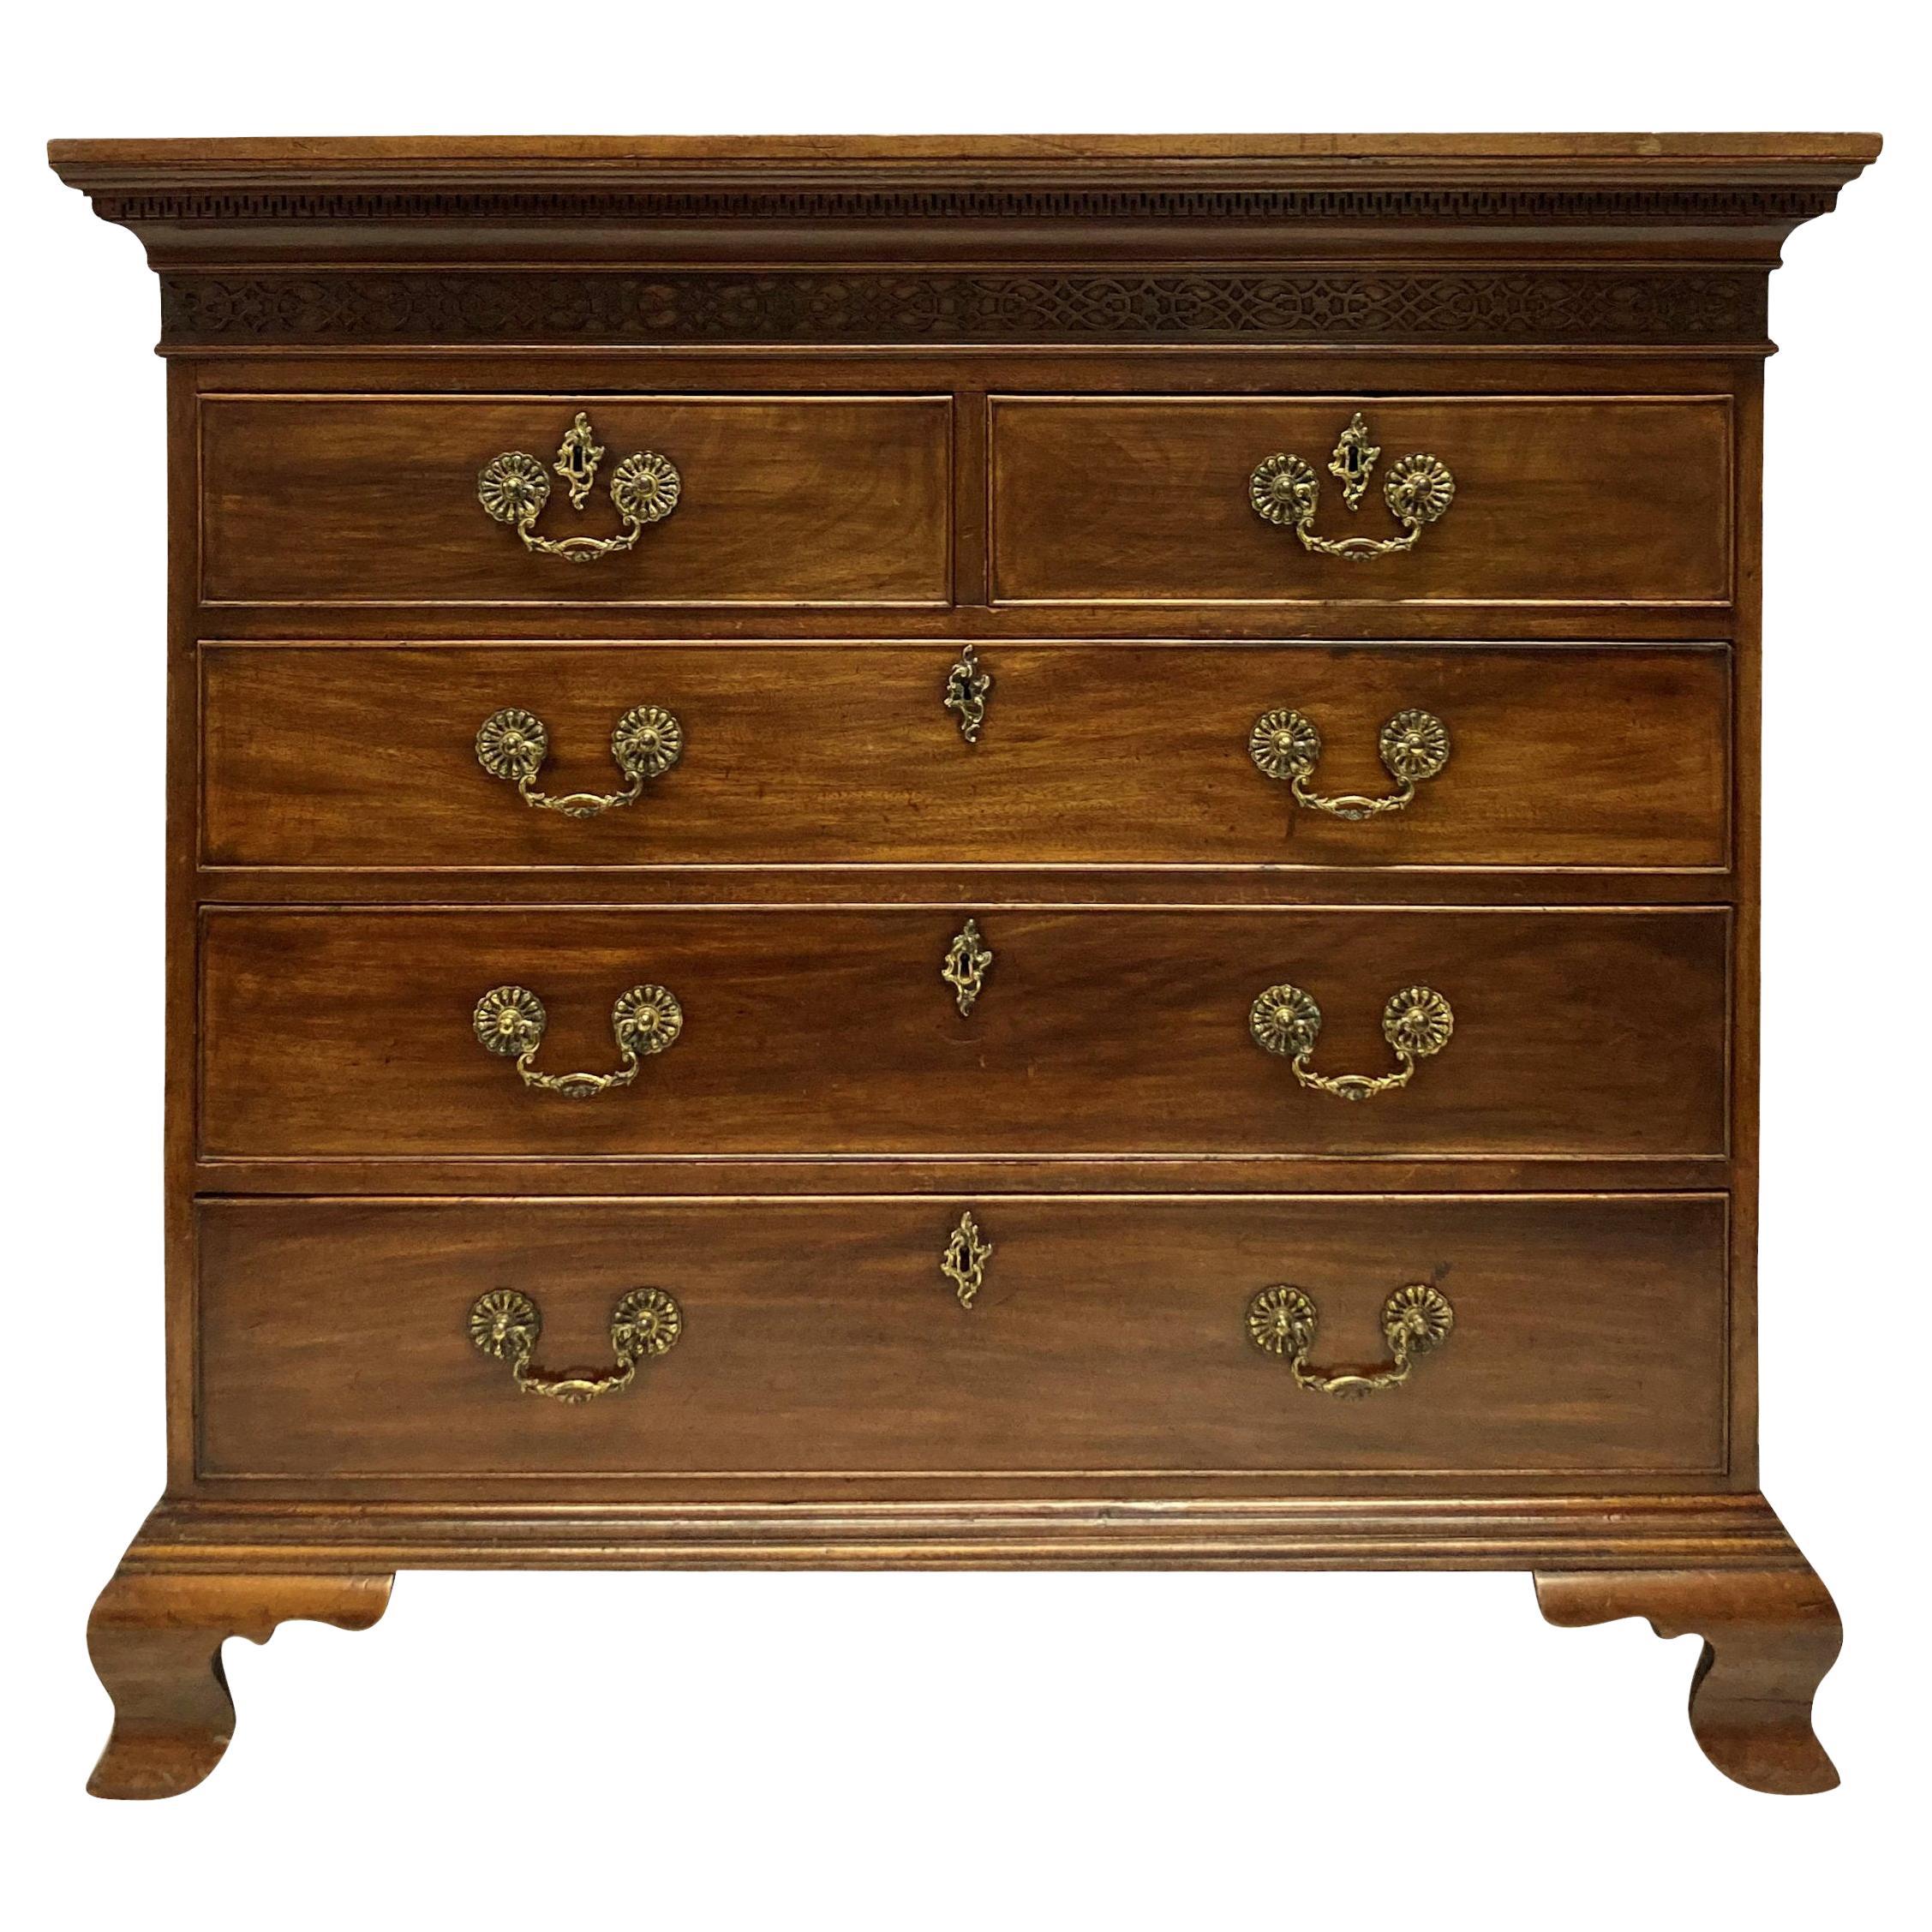 Georgian Chippendale Period Chest of Drawers